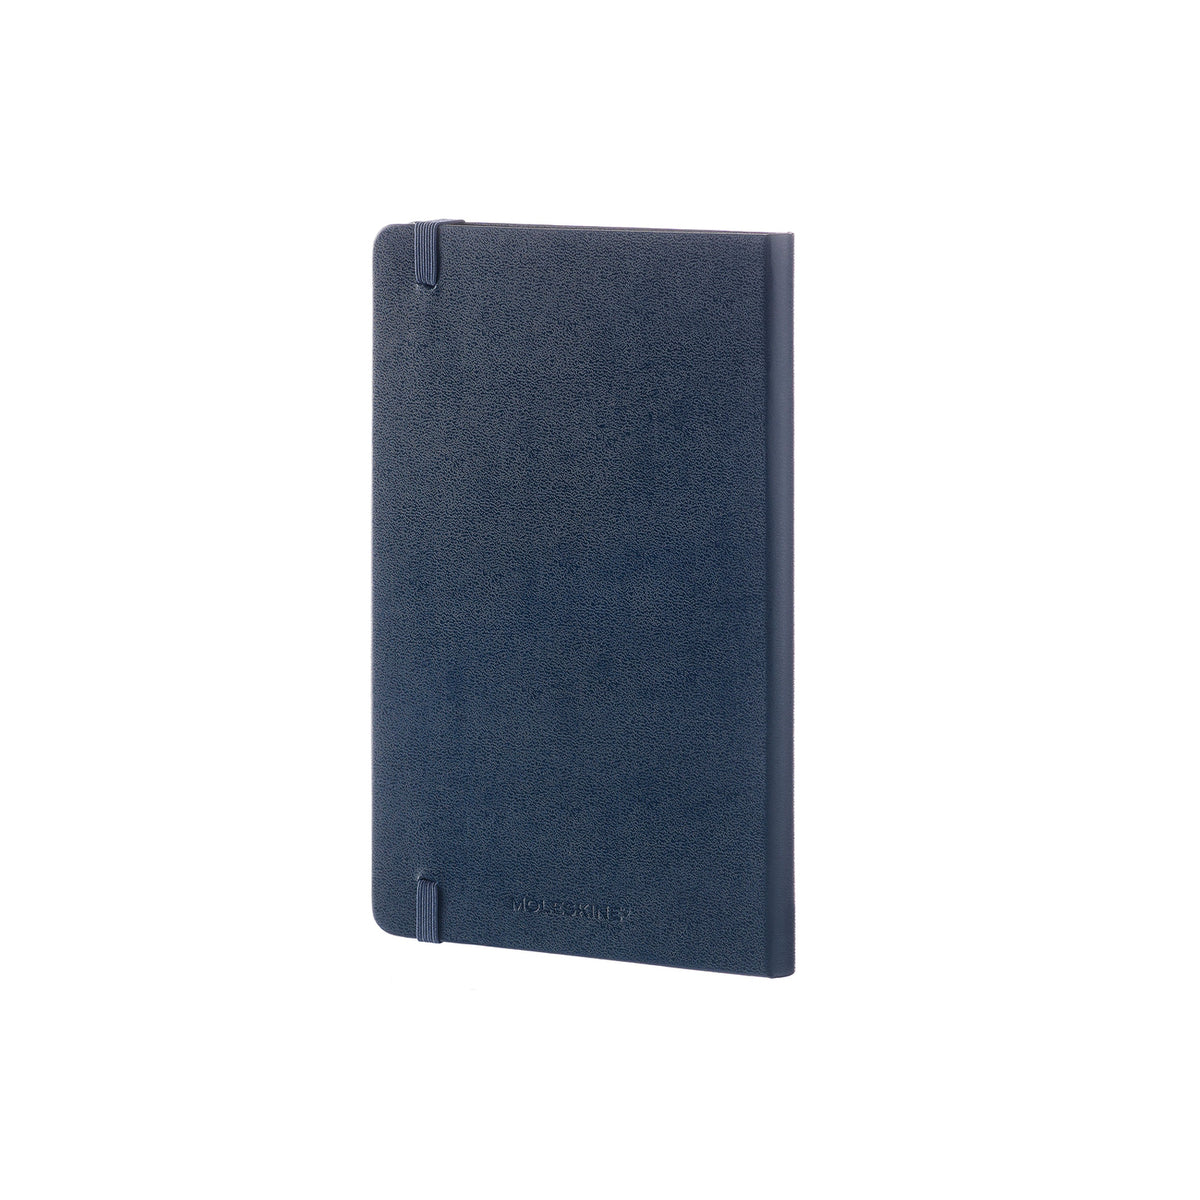 Moleskine - Classic Hard Cover Notebook - Ruled - Large - Sapphire Blue